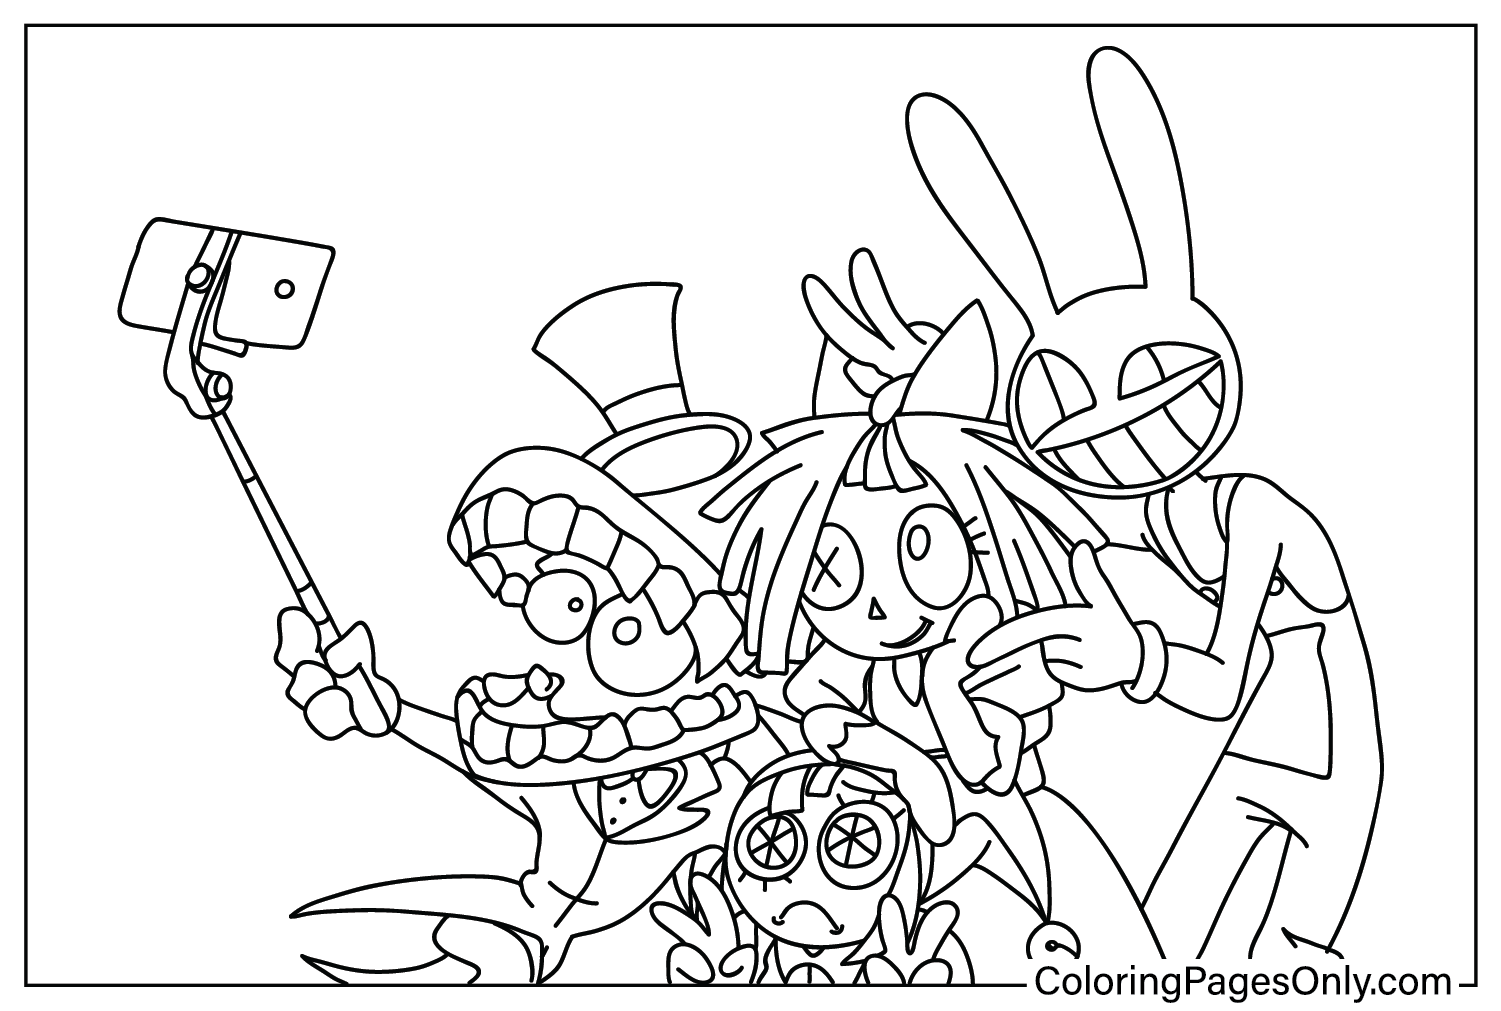 Pin on The Amazing Digital Circus Coloring Pages